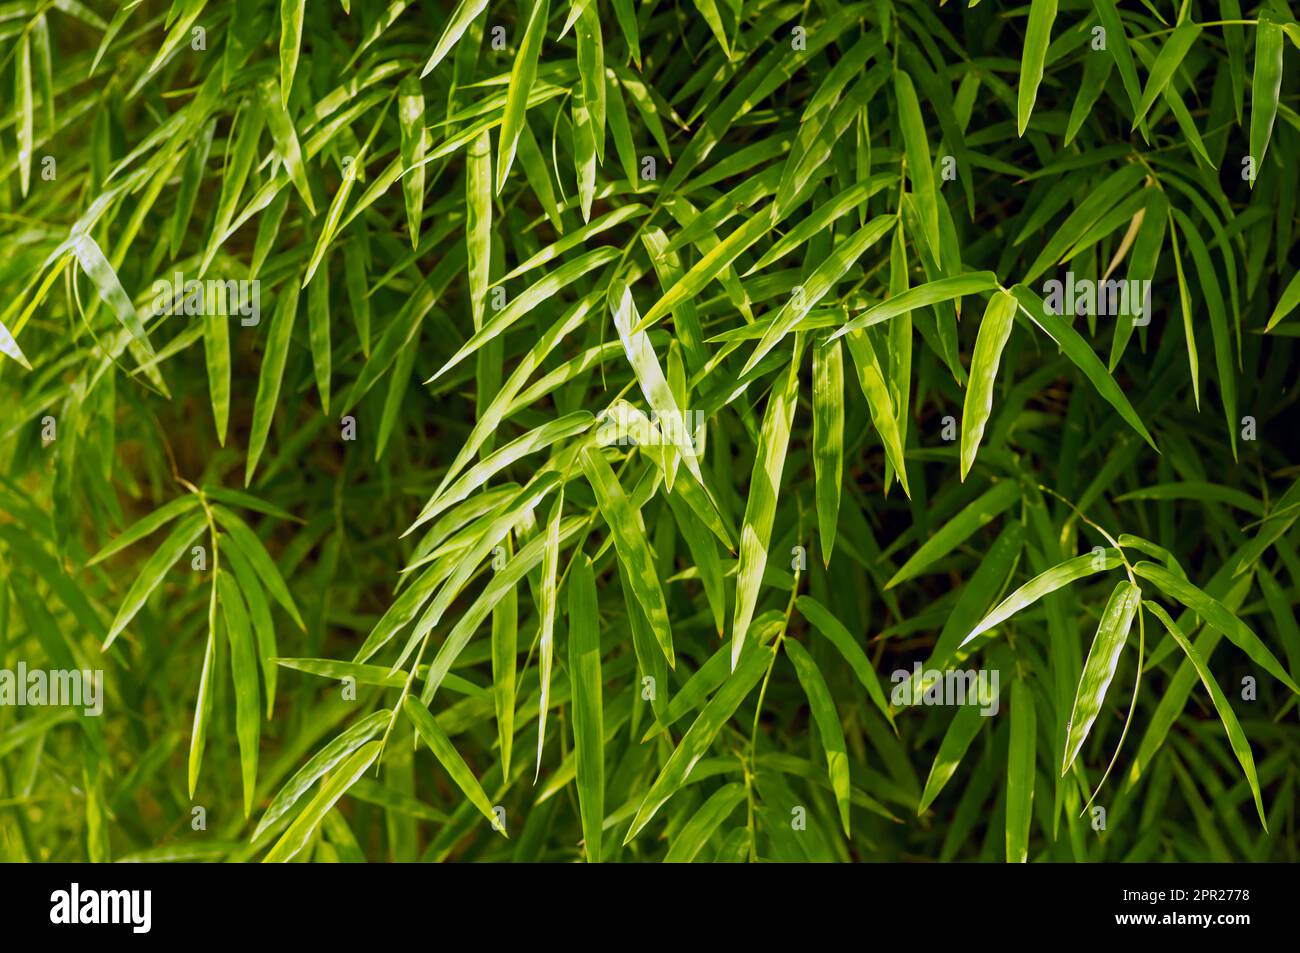 Bamboo (Bambusa sp) green leaves for natural background Stock Photo